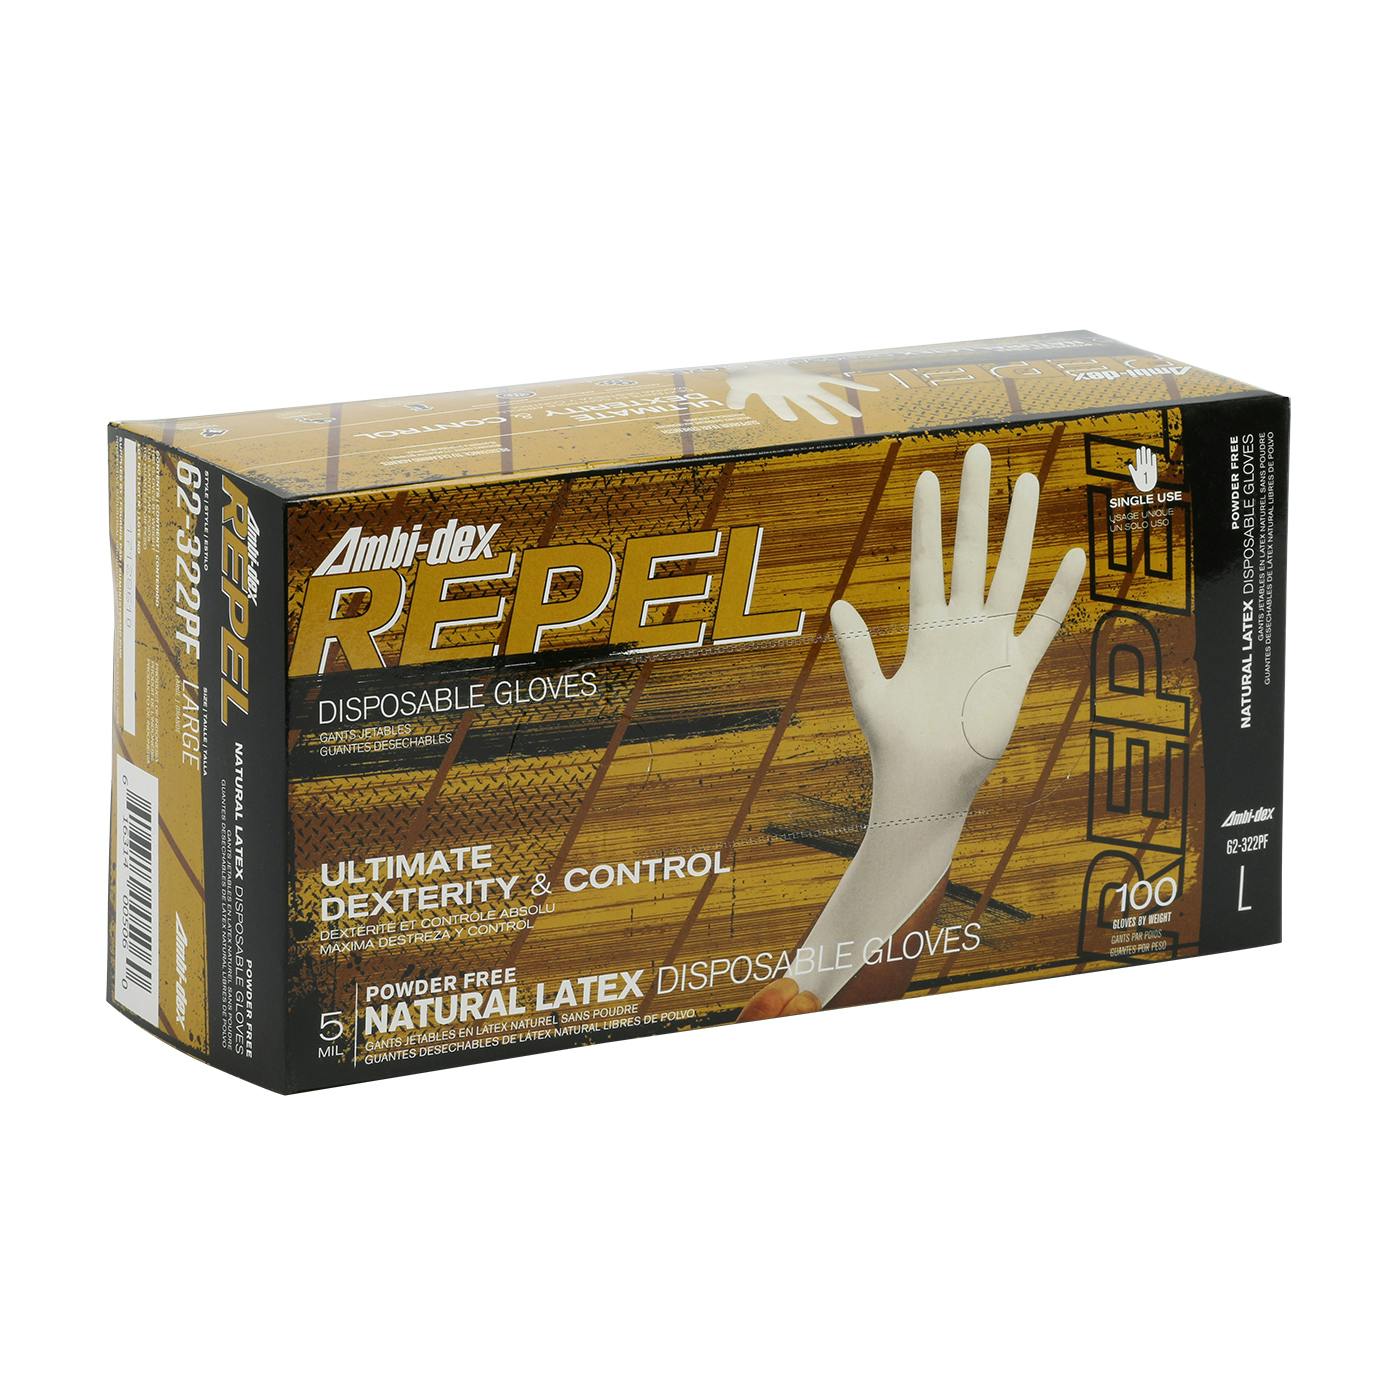 Ambi-dex® Repel Disposable Latex Glove, Powder Free with Textured Grip - 5 mil (62-322PF)